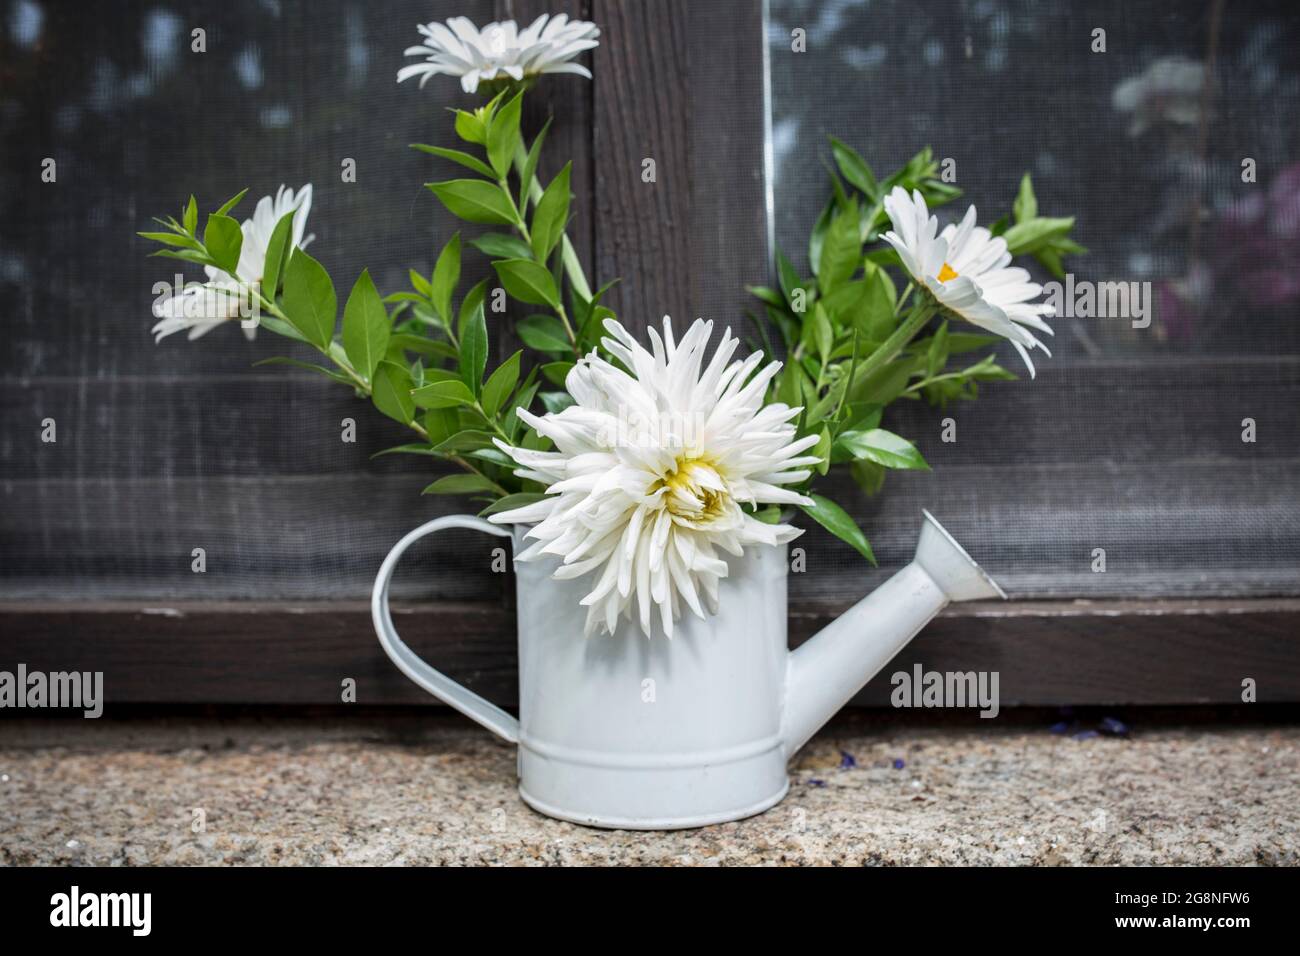 Old tin watering can reused  as a vase. Fresh white flowers decor over windowsill Stock Photo